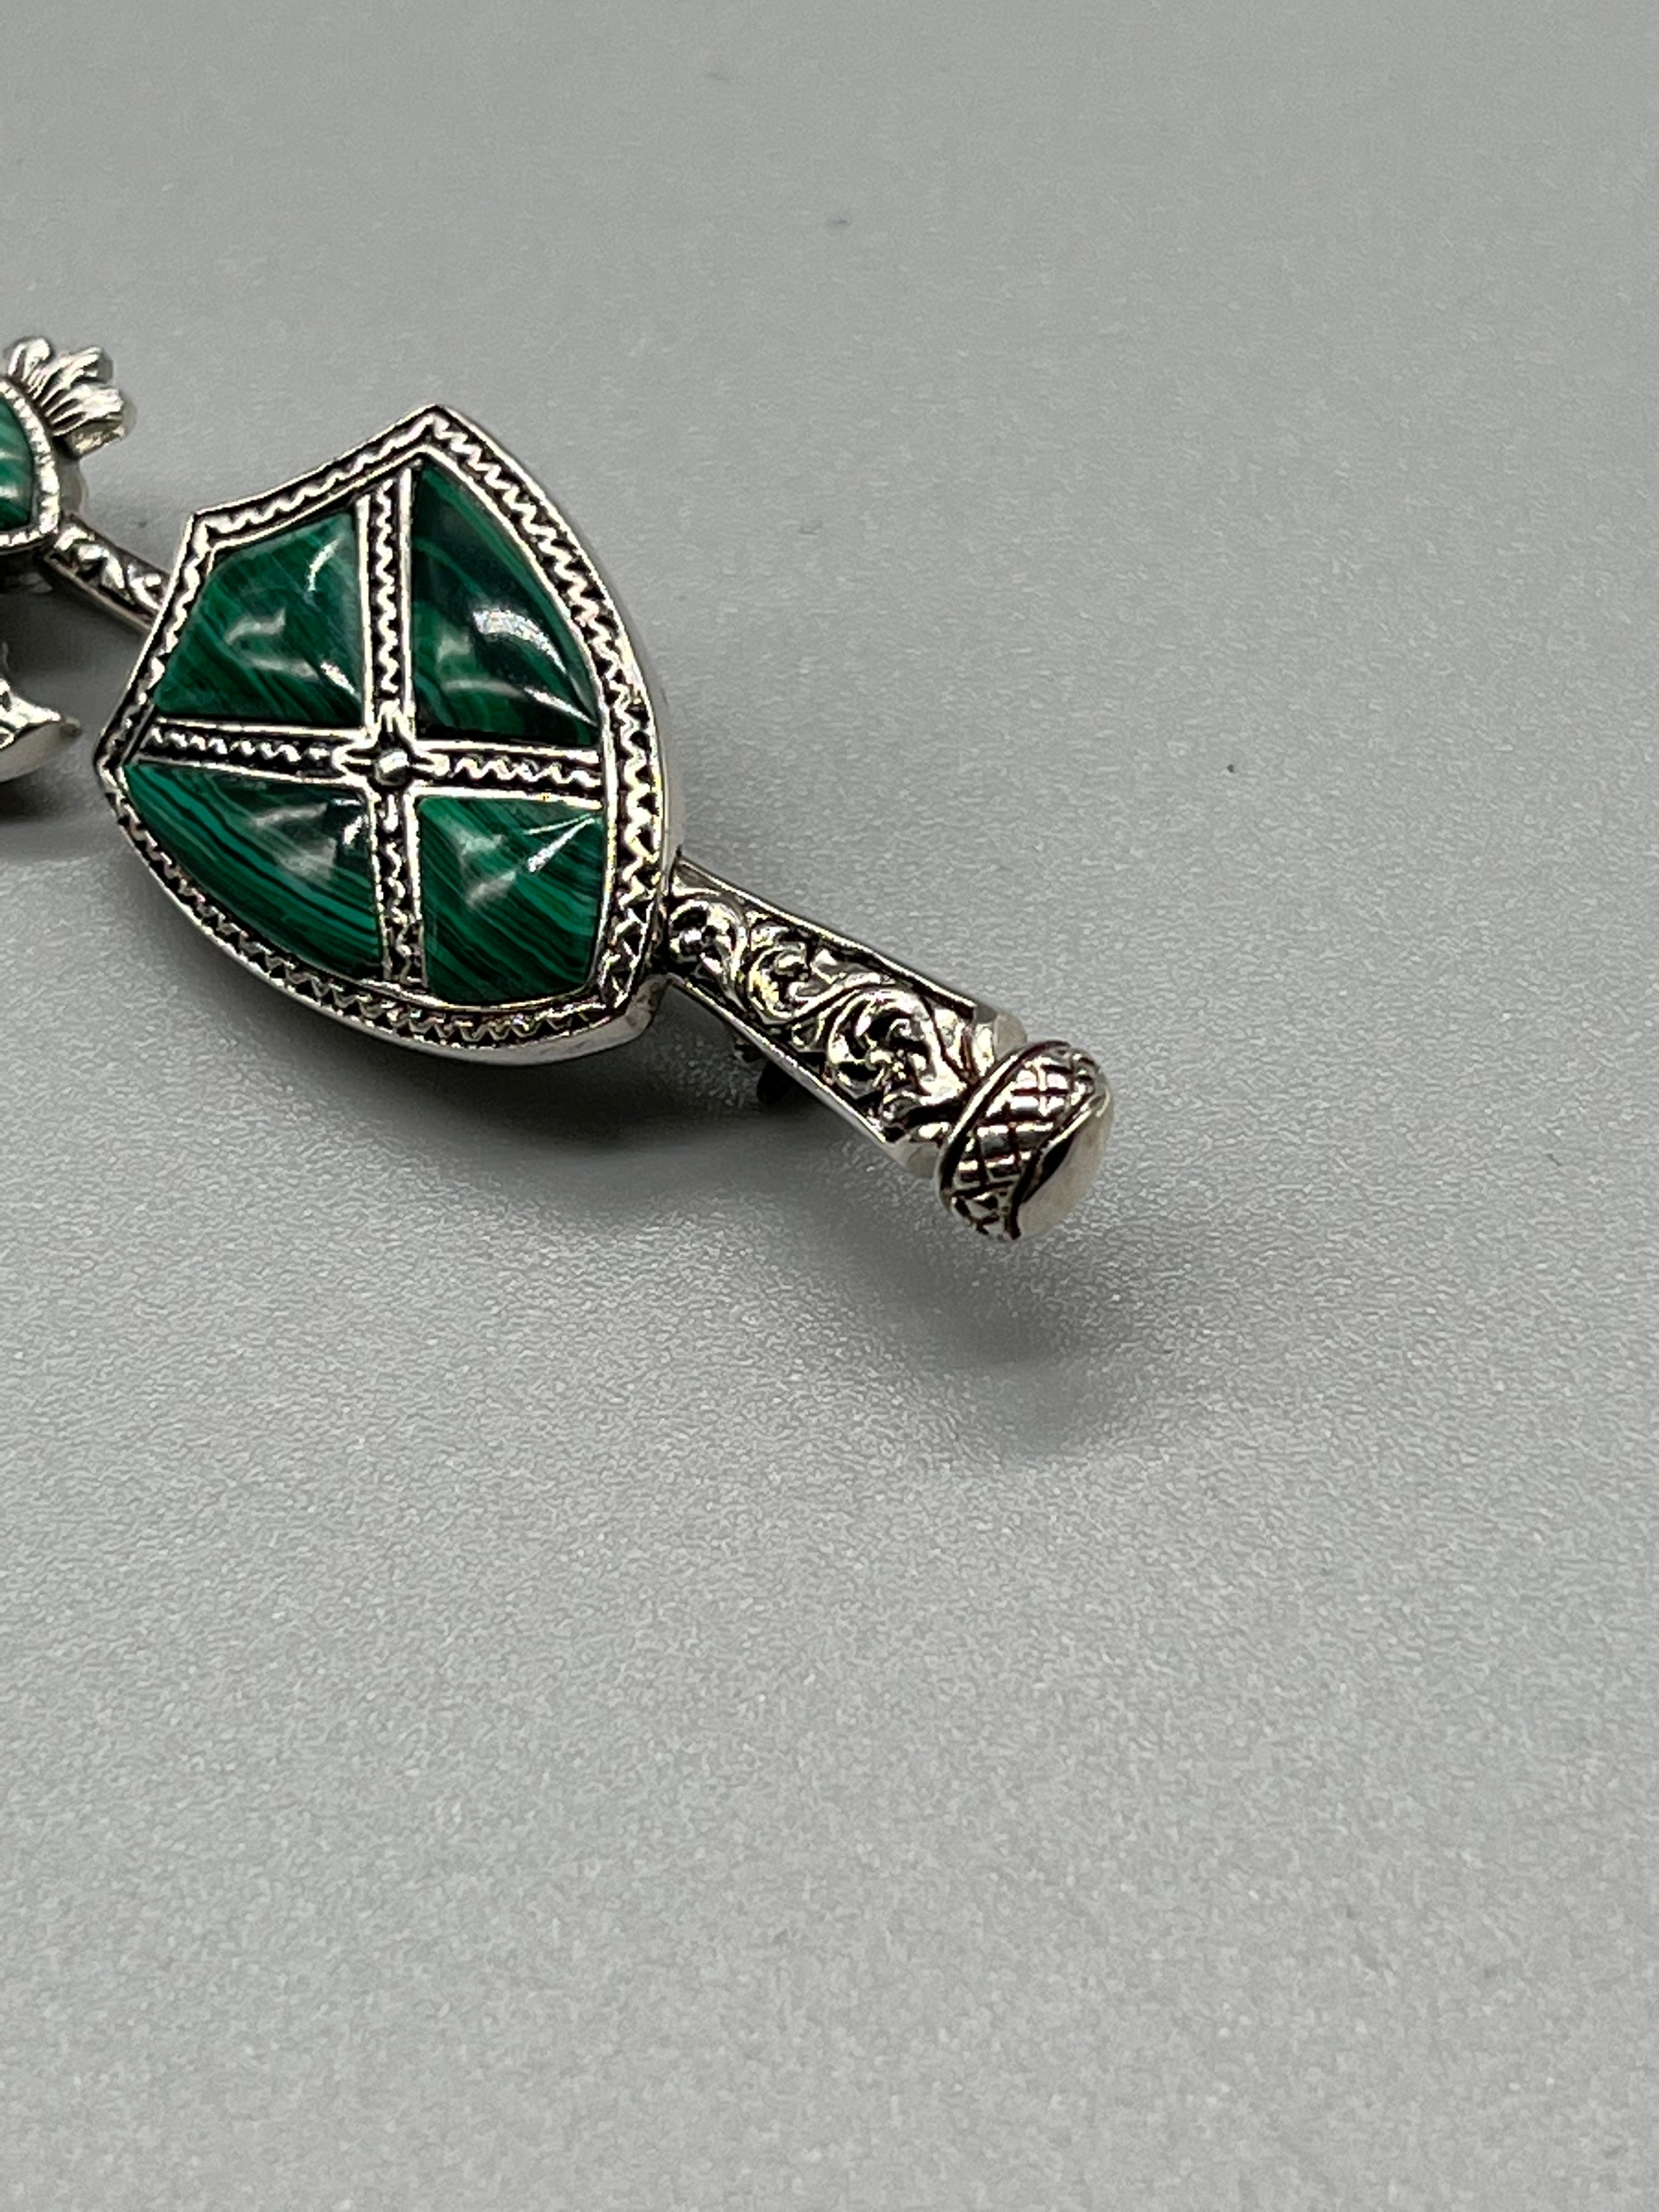 A Silver and Malecite Scottish axe brooch. [5.5cm high] - Image 2 of 3